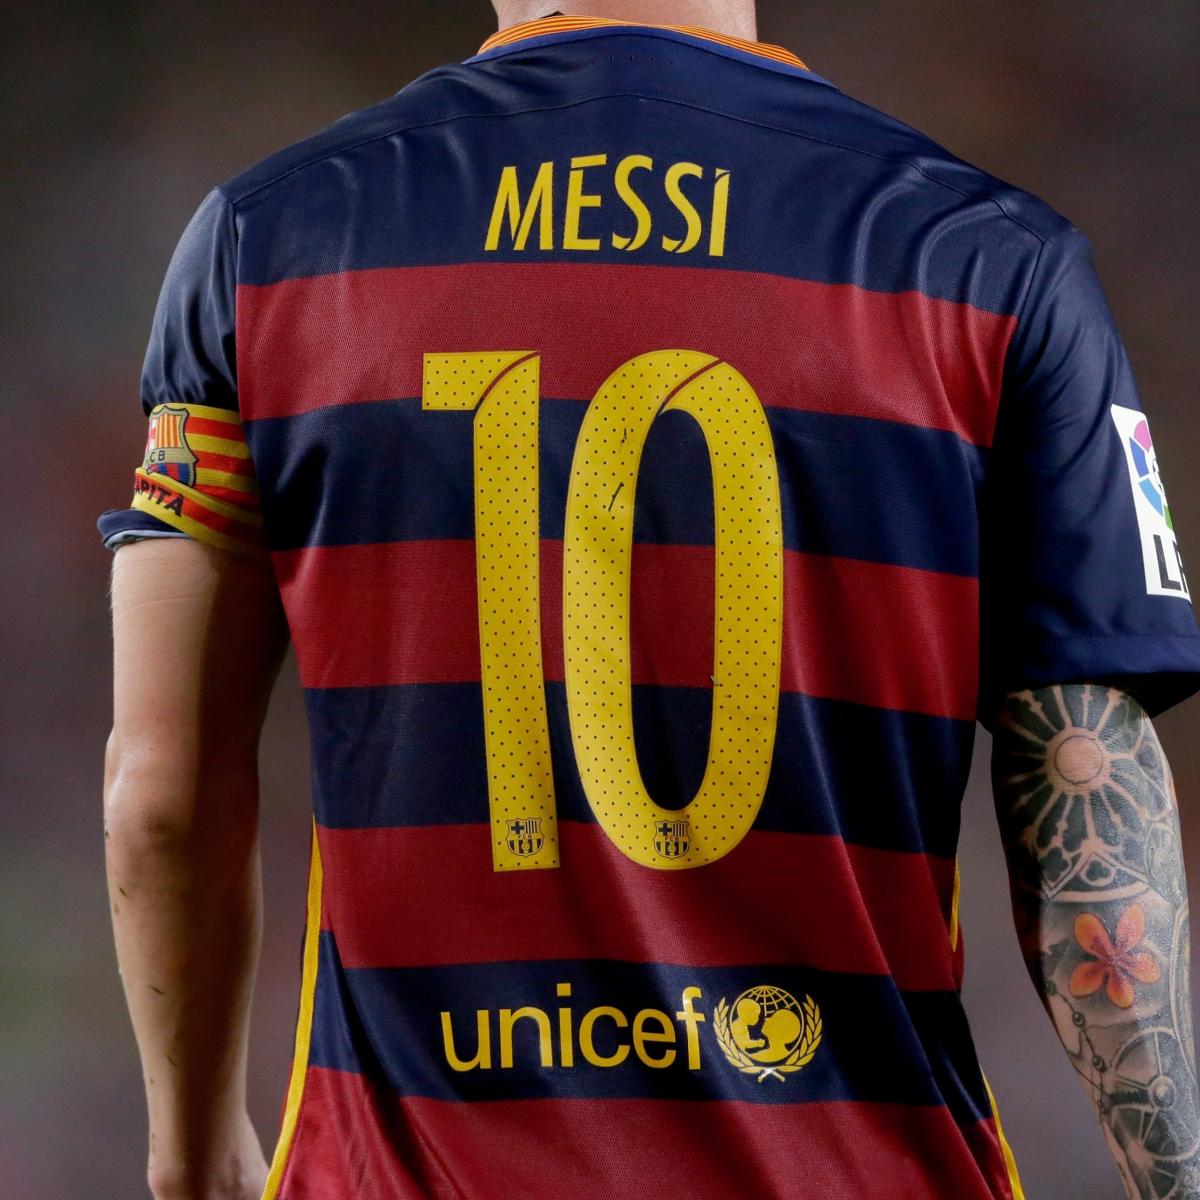 Leo Messi's Barcelona Shirt Is the Most Sold Cristiano Ronaldo 2nd | News, Scores, Highlights, Stats, and Rumors Bleacher Report